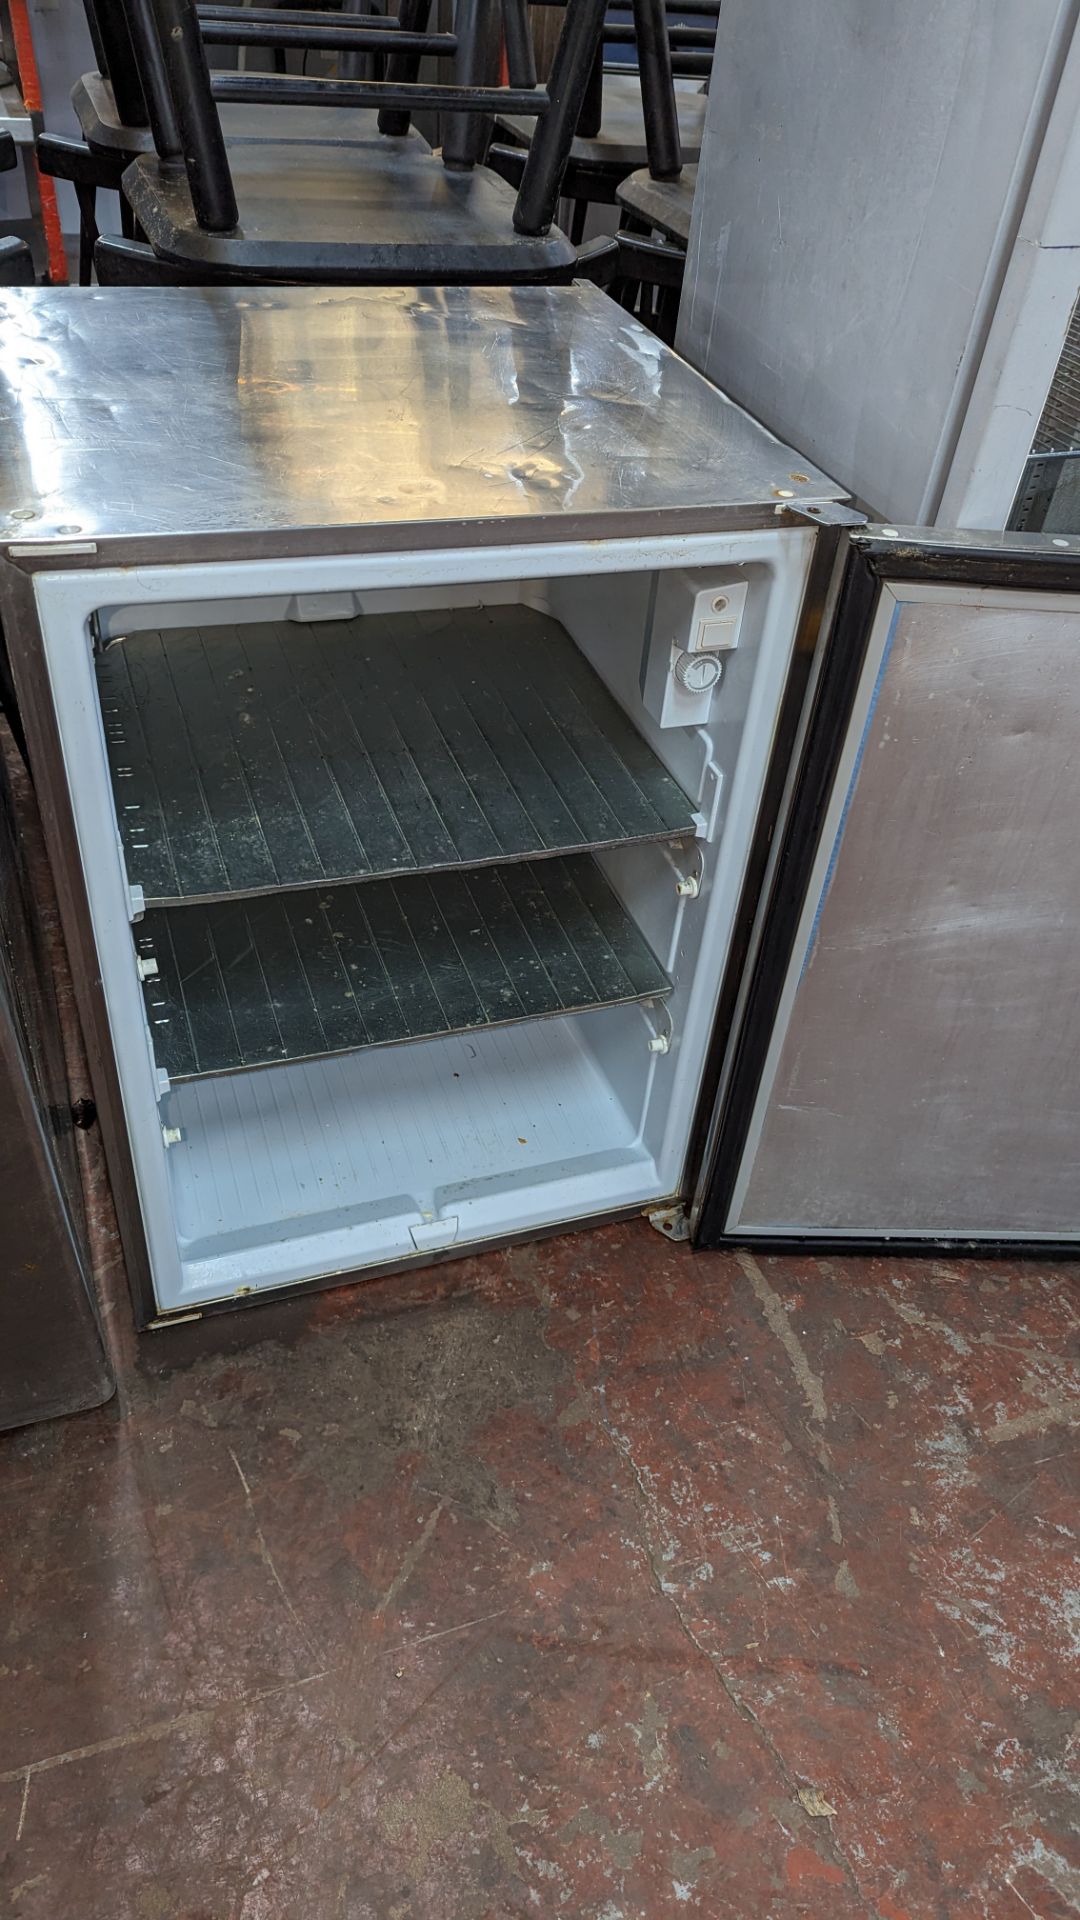 Stainless steel under counter freezer - Image 3 of 4